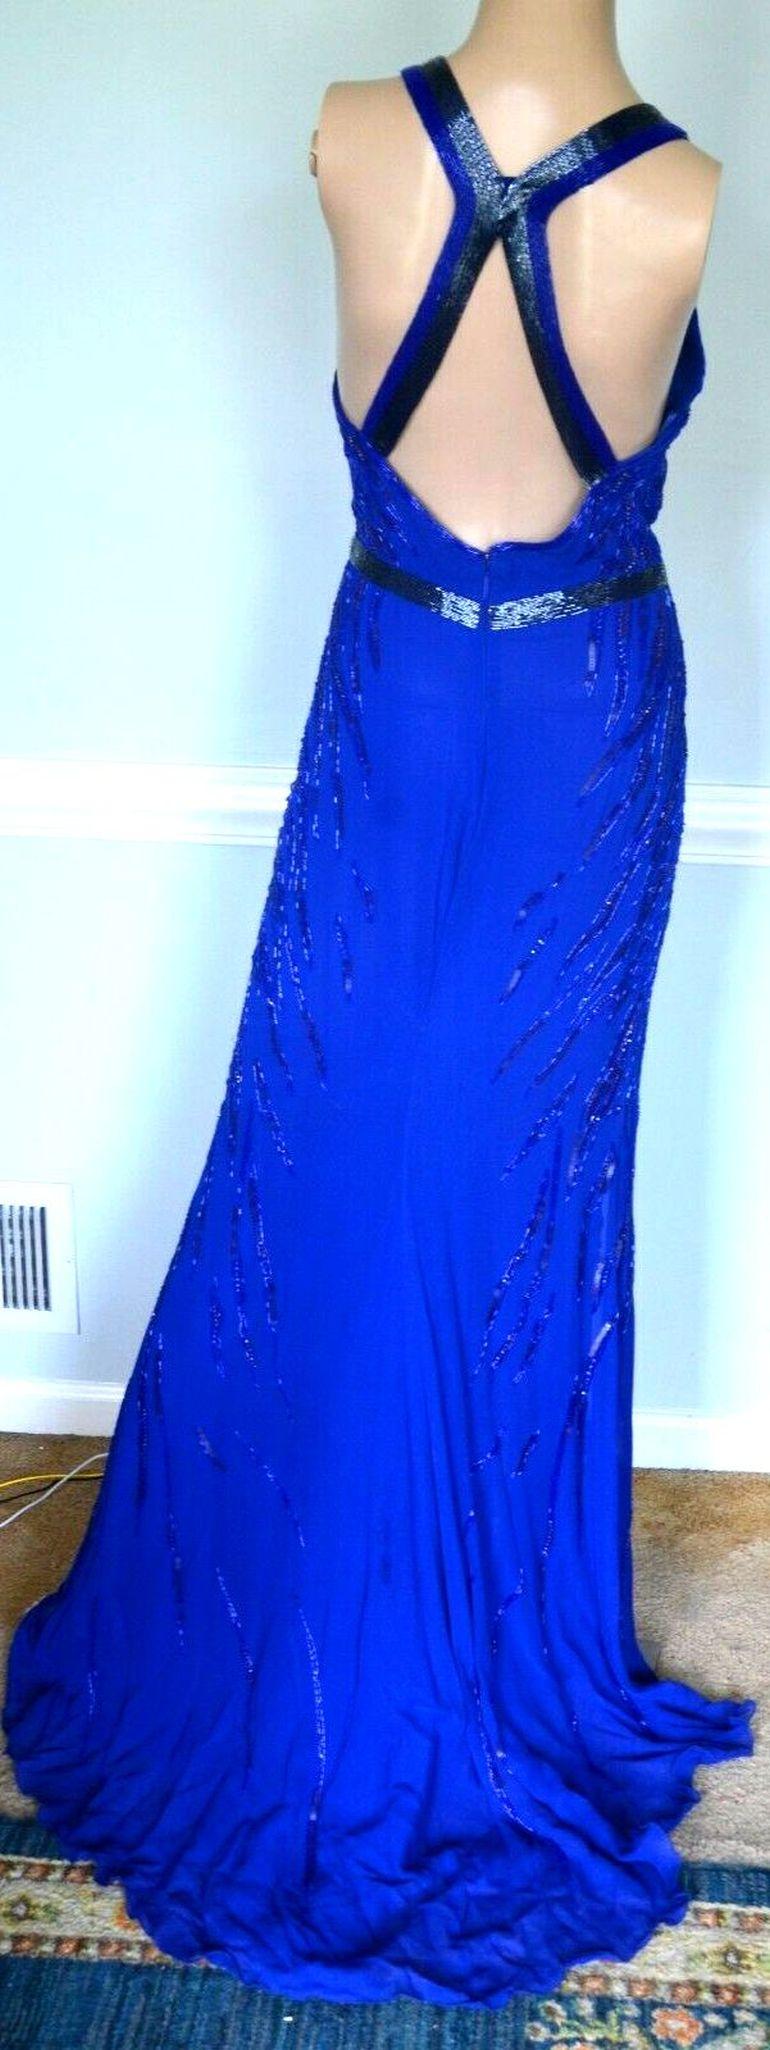 ROBERTO CAVALLI Embellished Blue Sequin Evening Gown Long Dress US 2 4 / IT 40 In Excellent Condition For Sale In Goshen, KY